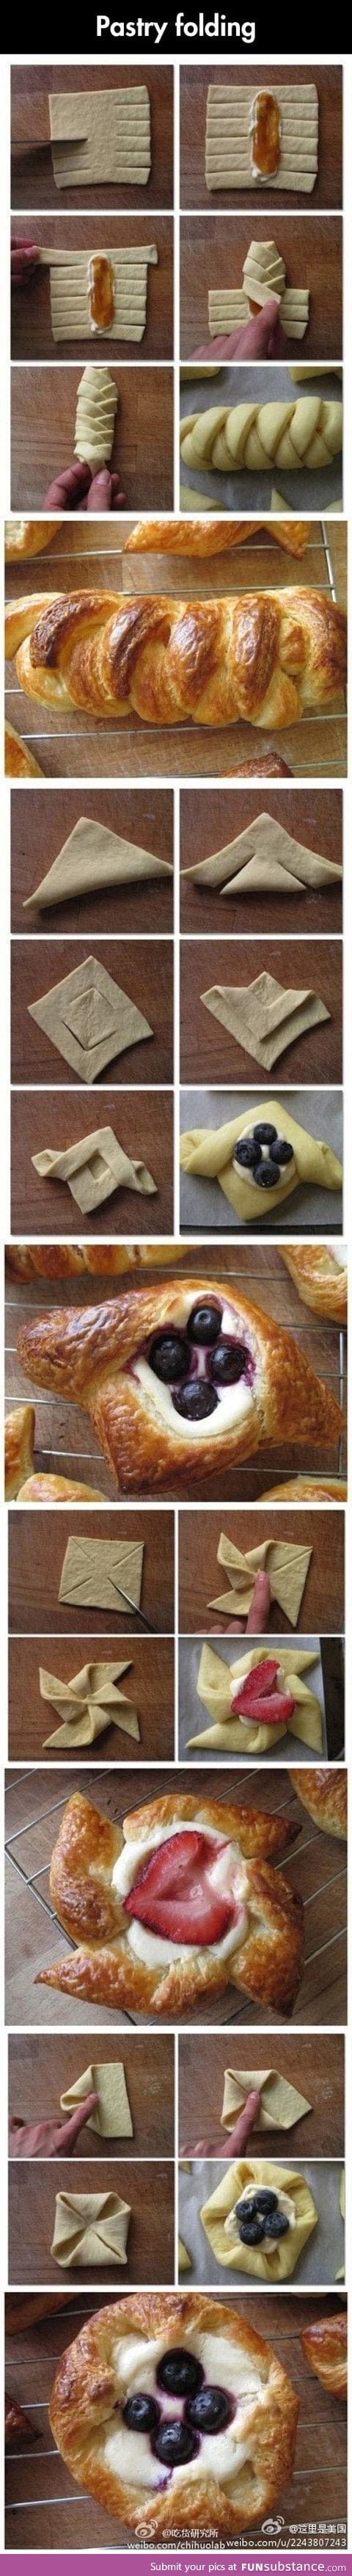 How pastries are folded to get their shape